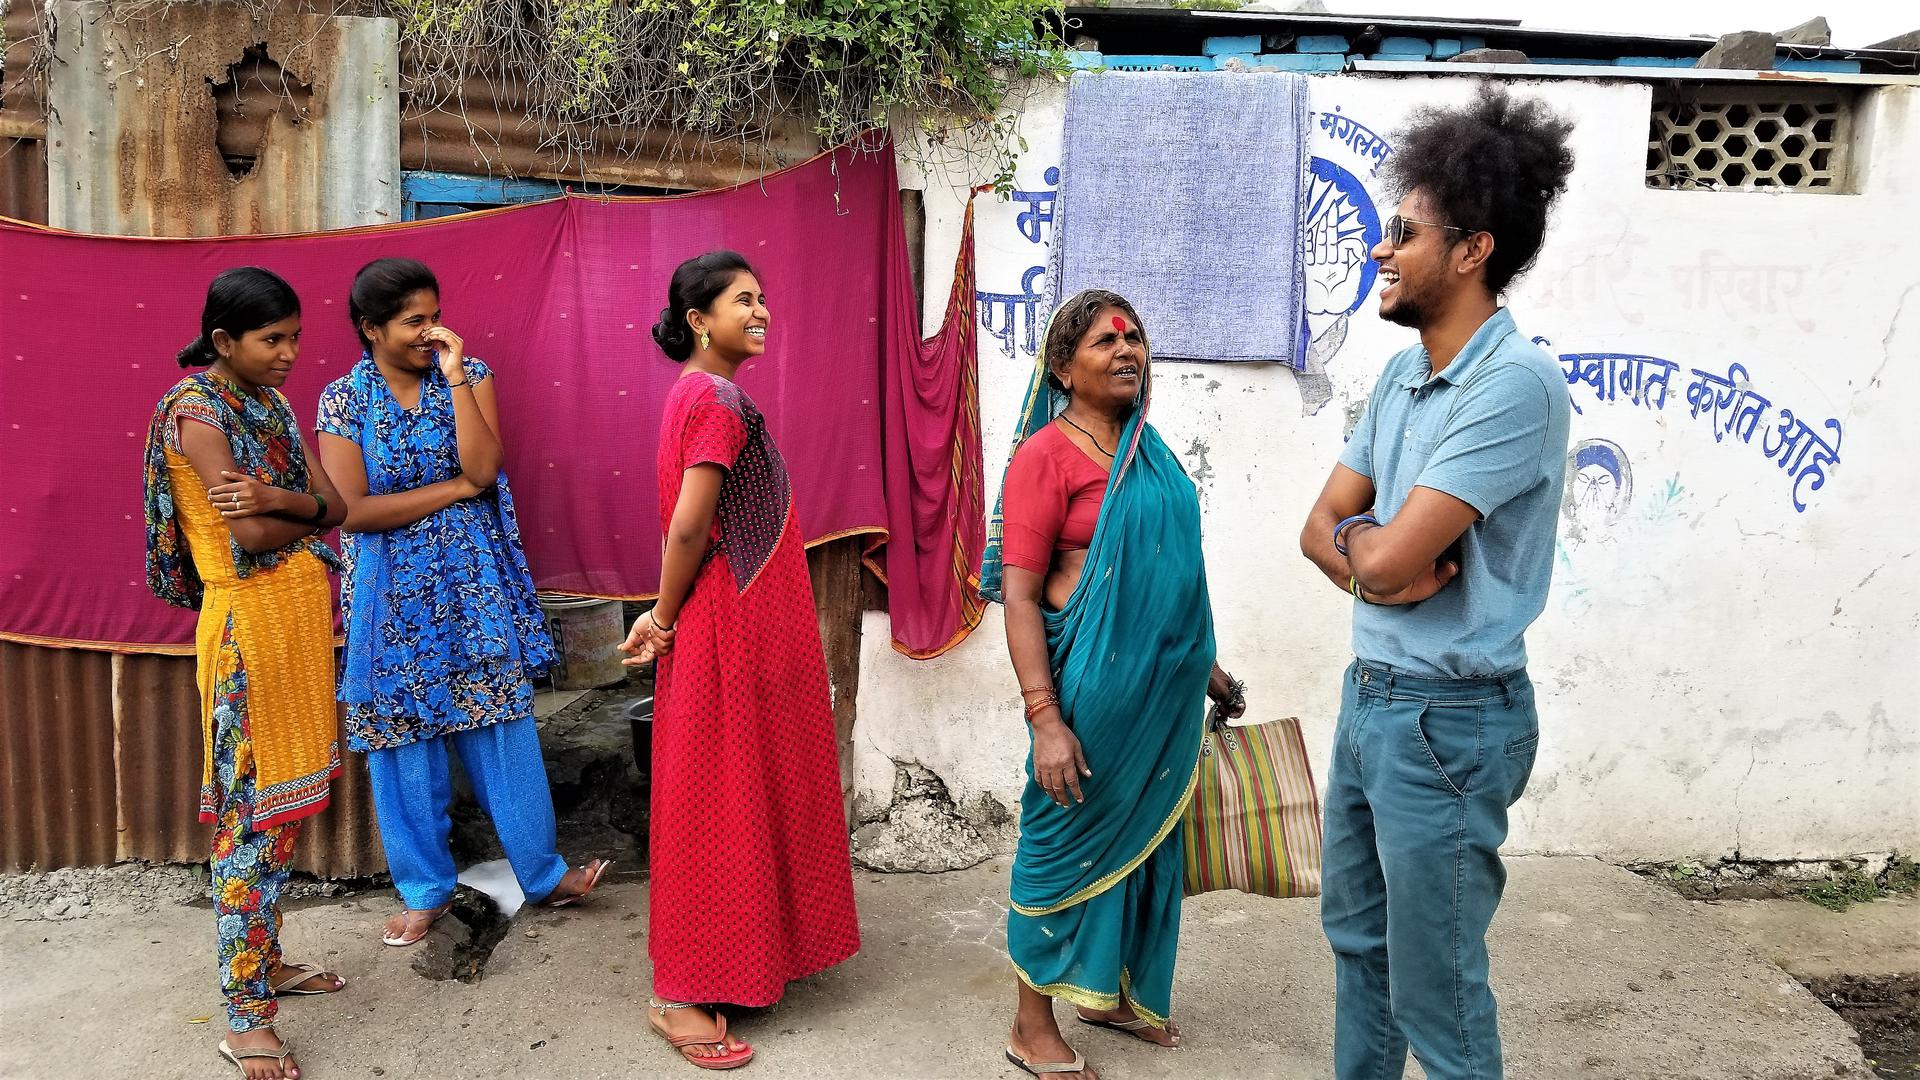 Several women in saris and a man laugh